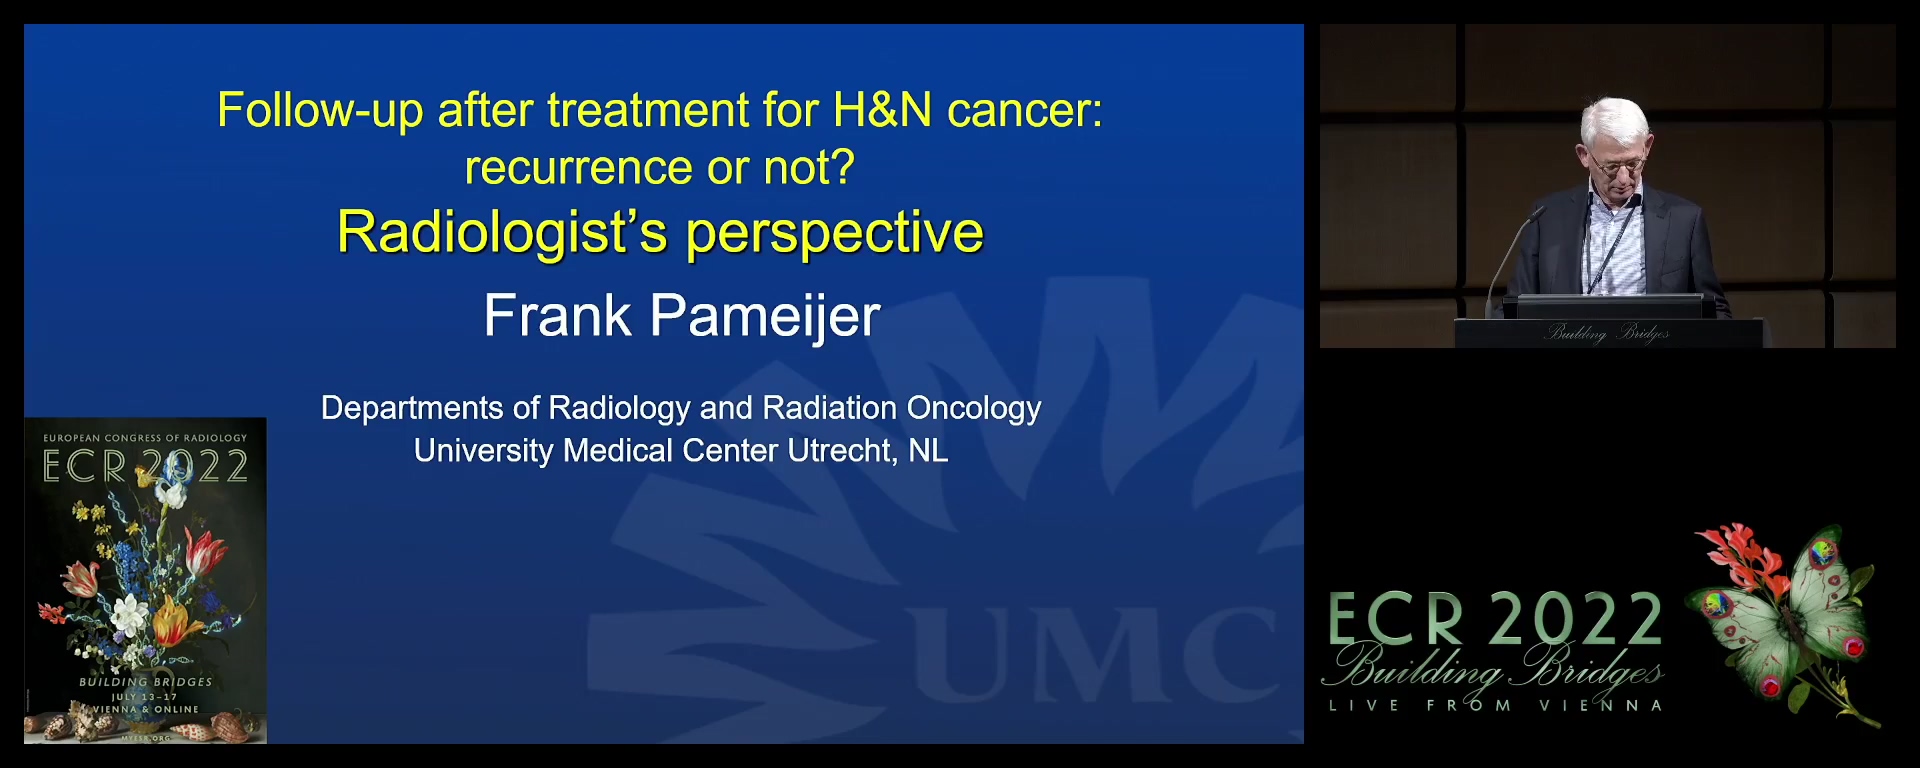 Imaging features after treatment for head and neck cancer: the radiologist's perspective